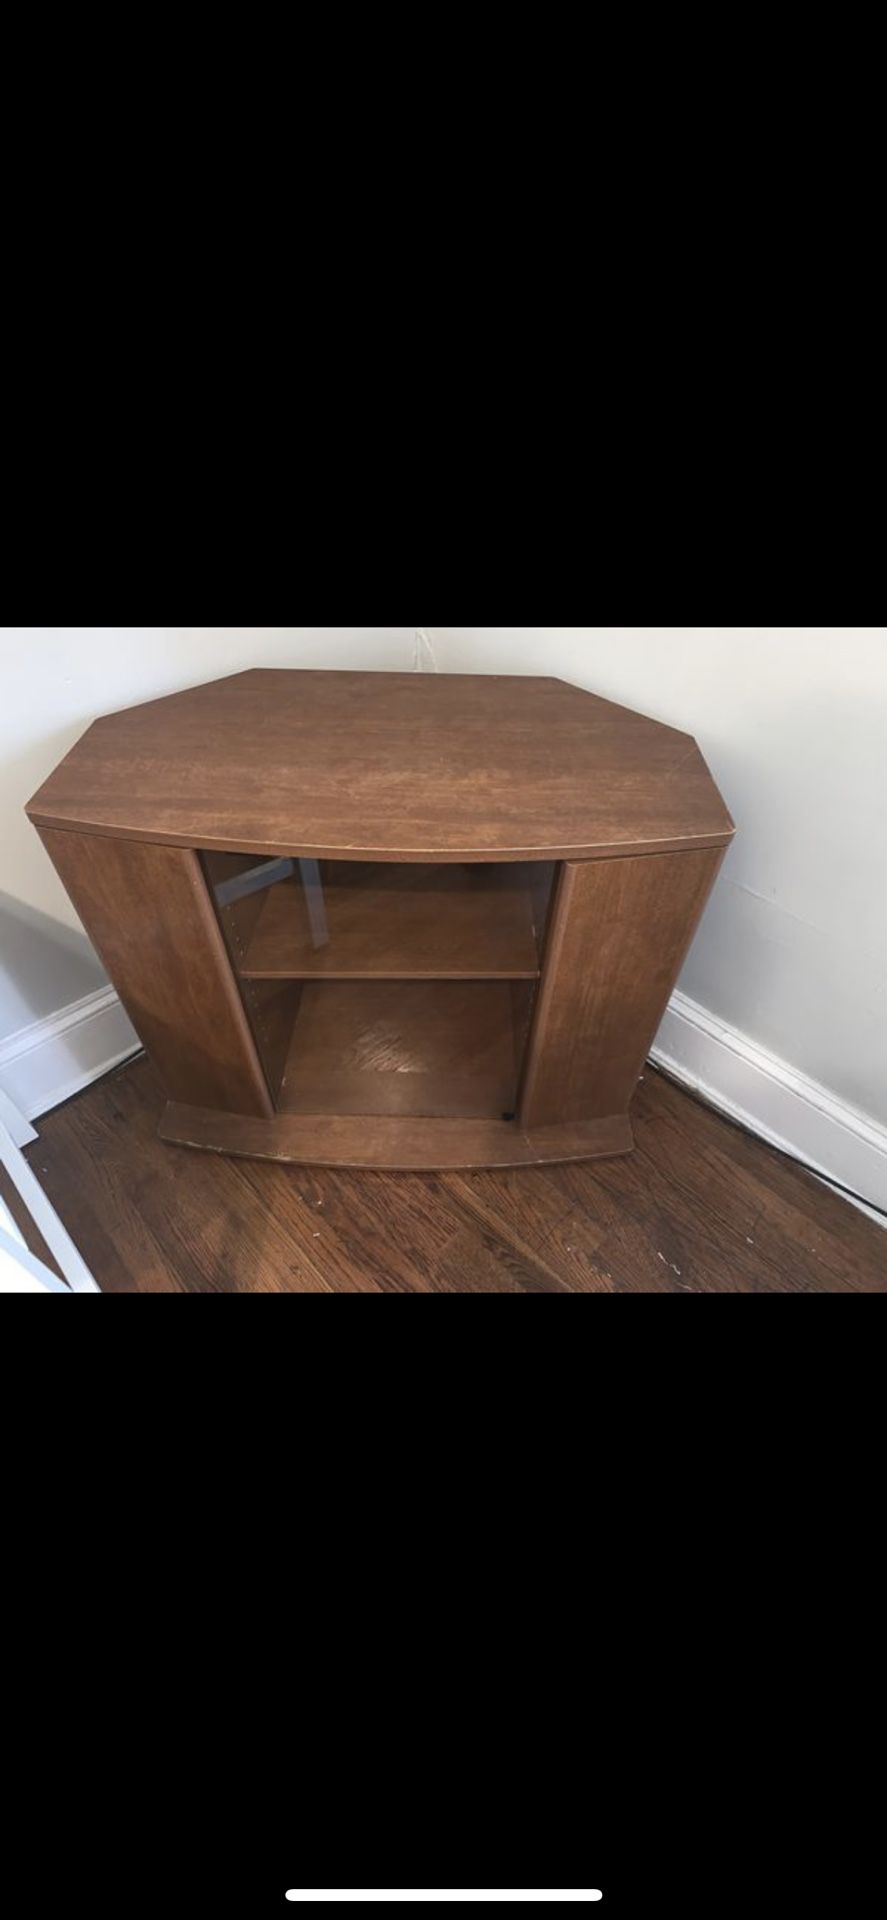 Tv Stand. Media center for Xbox 360, play station ps4, DVD player, cable box, real wood glass front solid build 3 doors two shelves in each. Furnitur